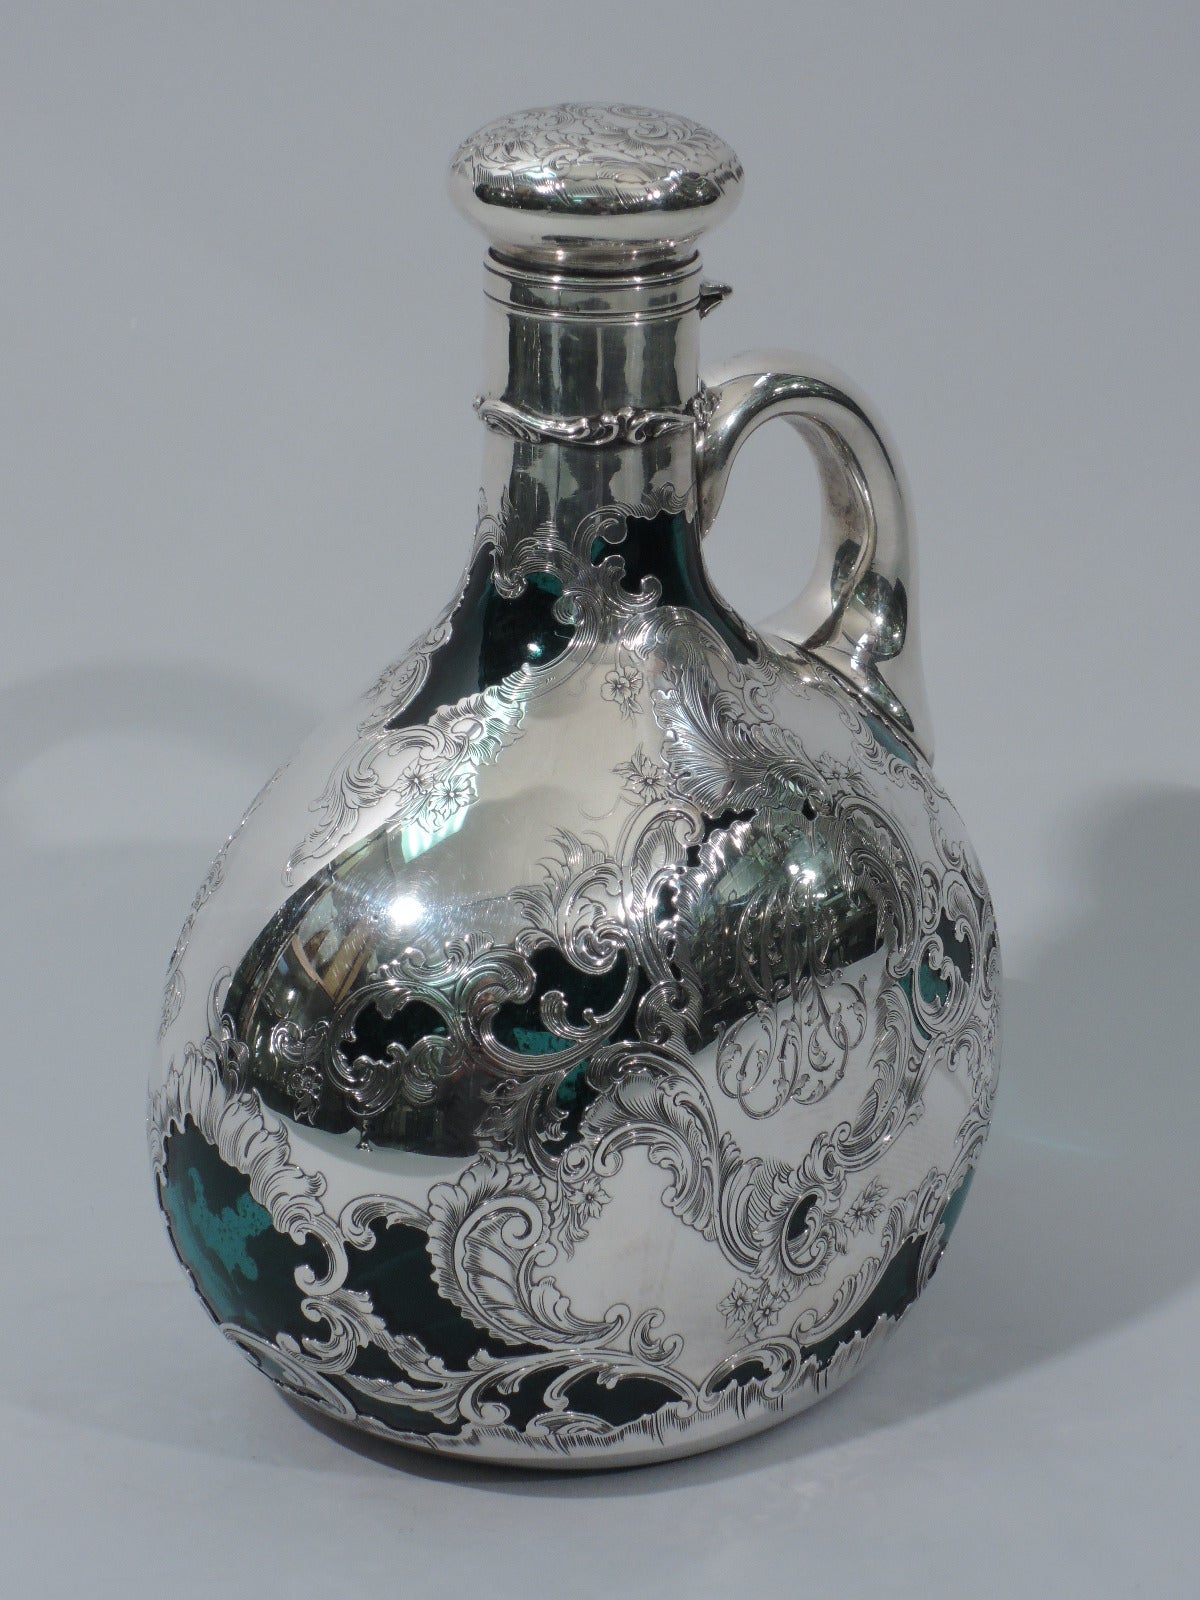 Emerald glass jug decanter with silver overlay. Made by Gorham in Providence, circa 1890. Globular body, and cylindrical neck. Engraved and chased flowers, foliage, and scrolls, with peeps of rich green. Bun cover is hinged and cork lined with same